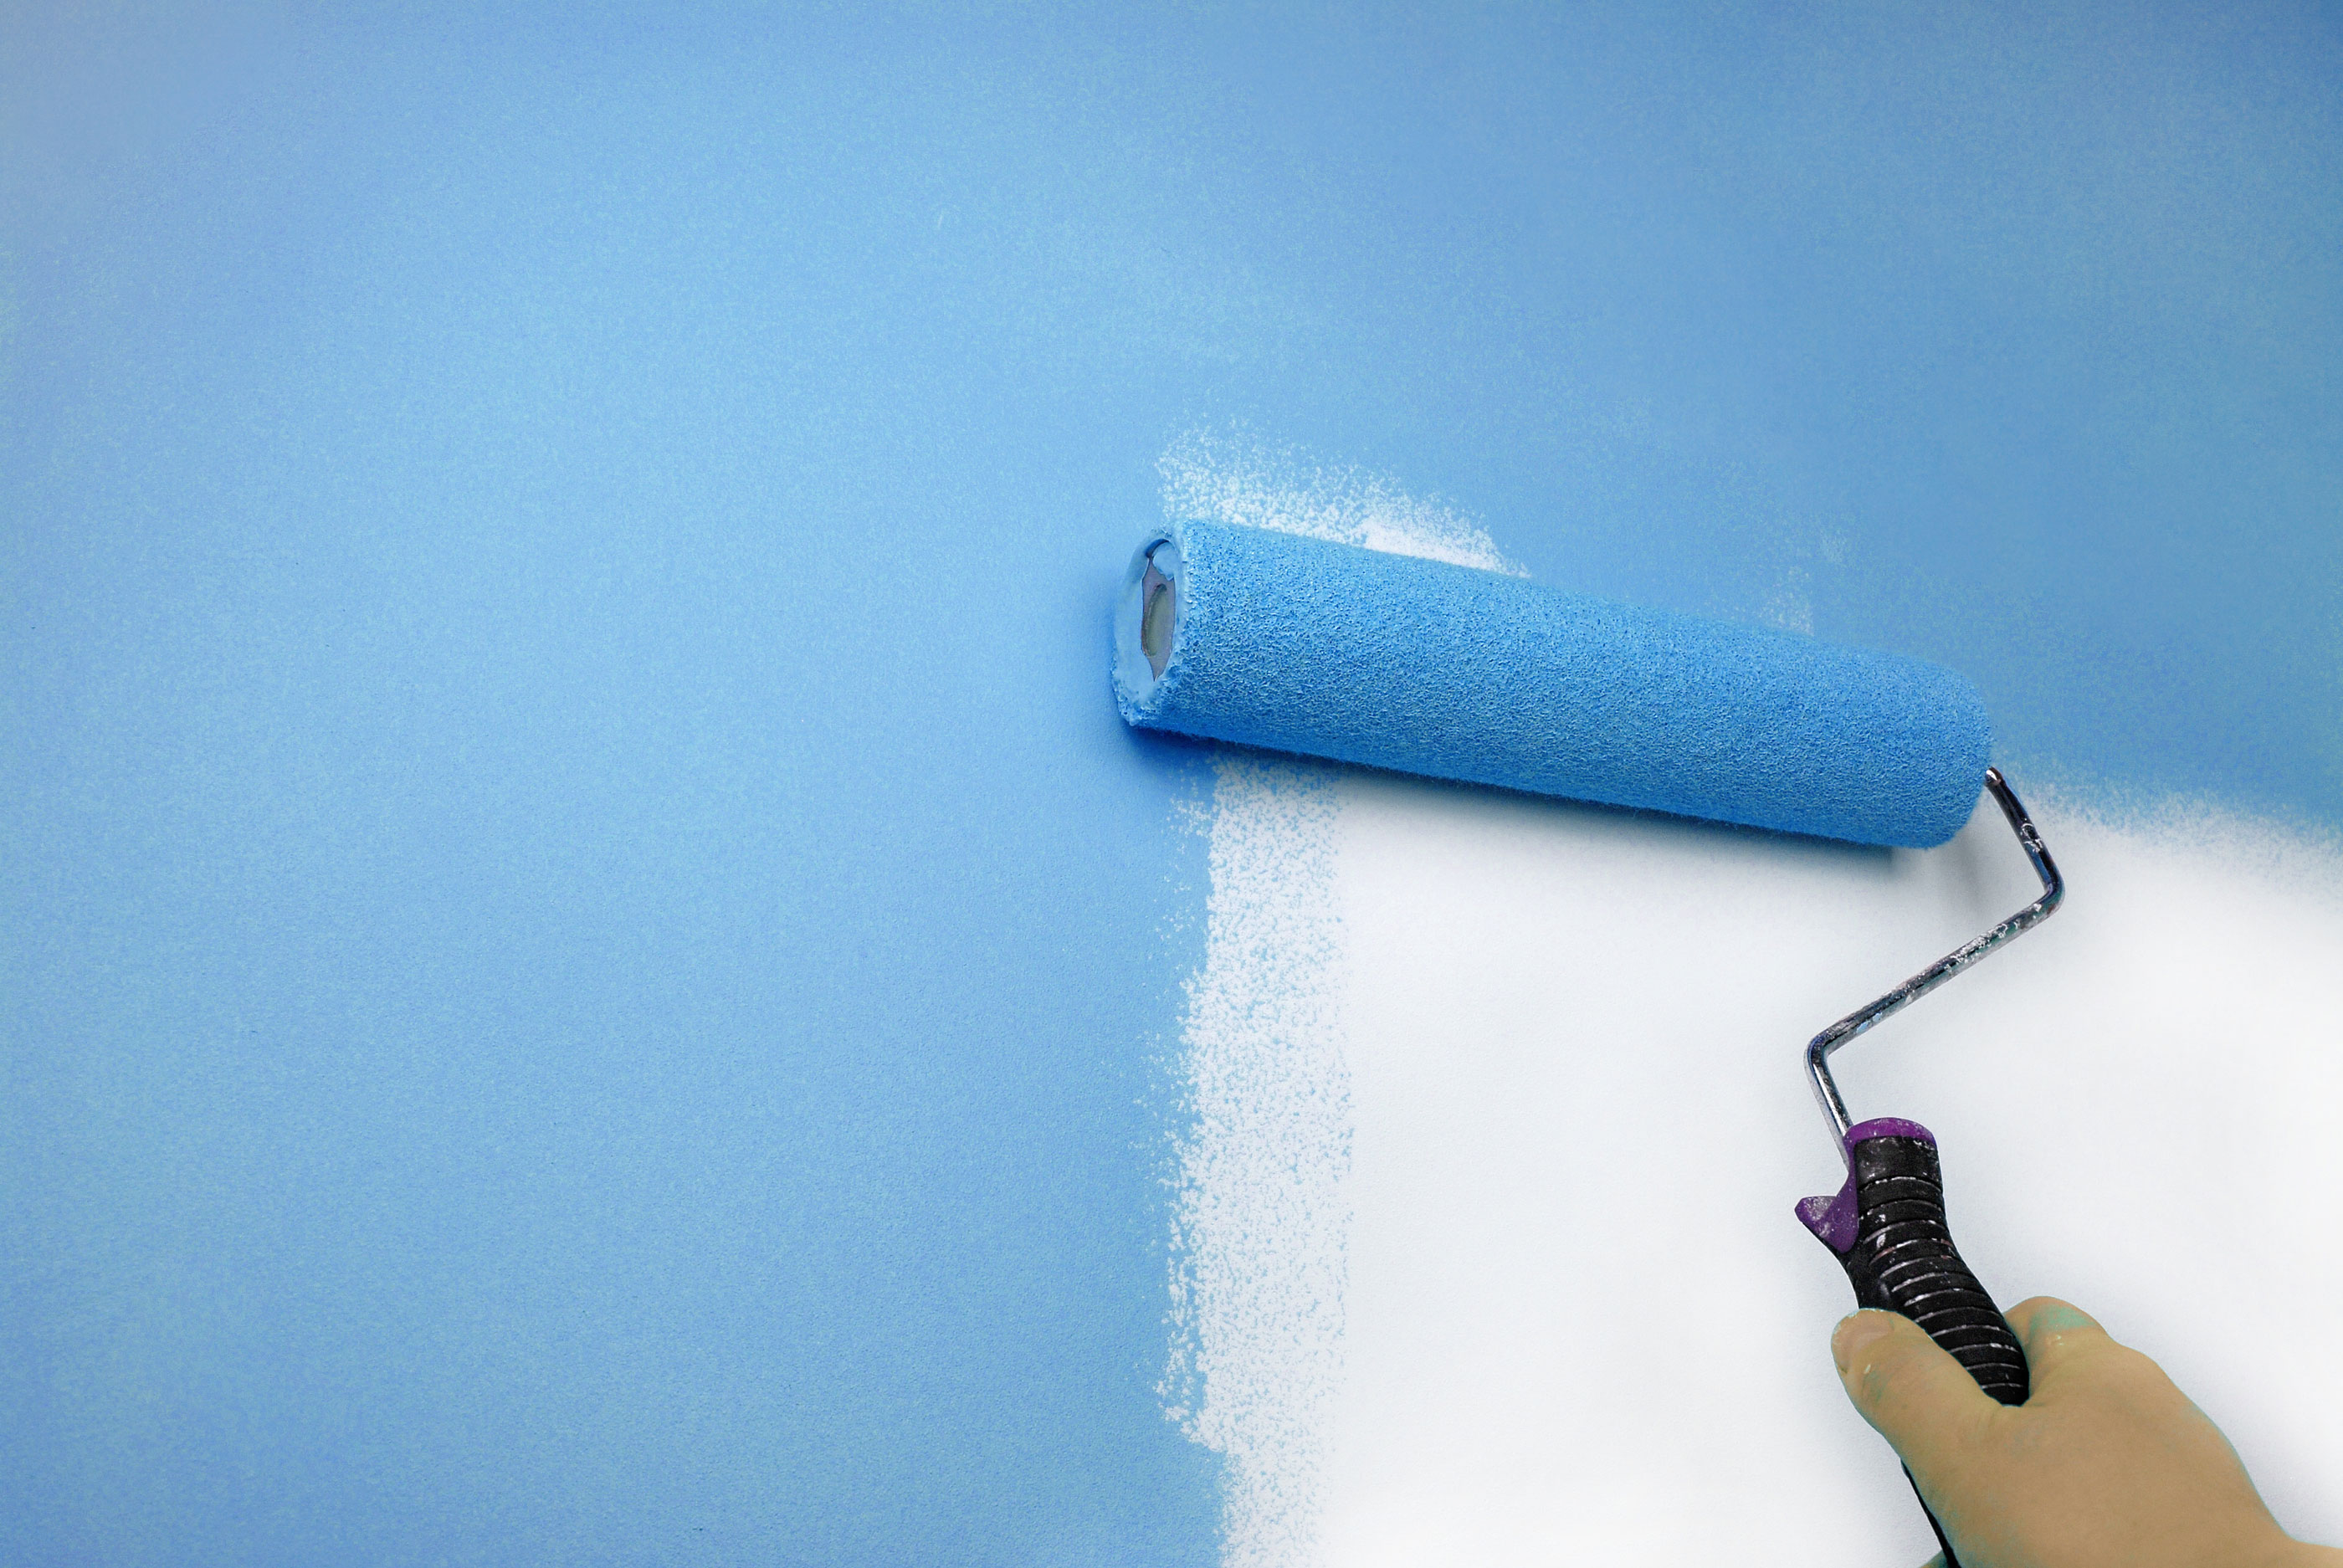 painting How long does it take to paint a room? Info to know before starting